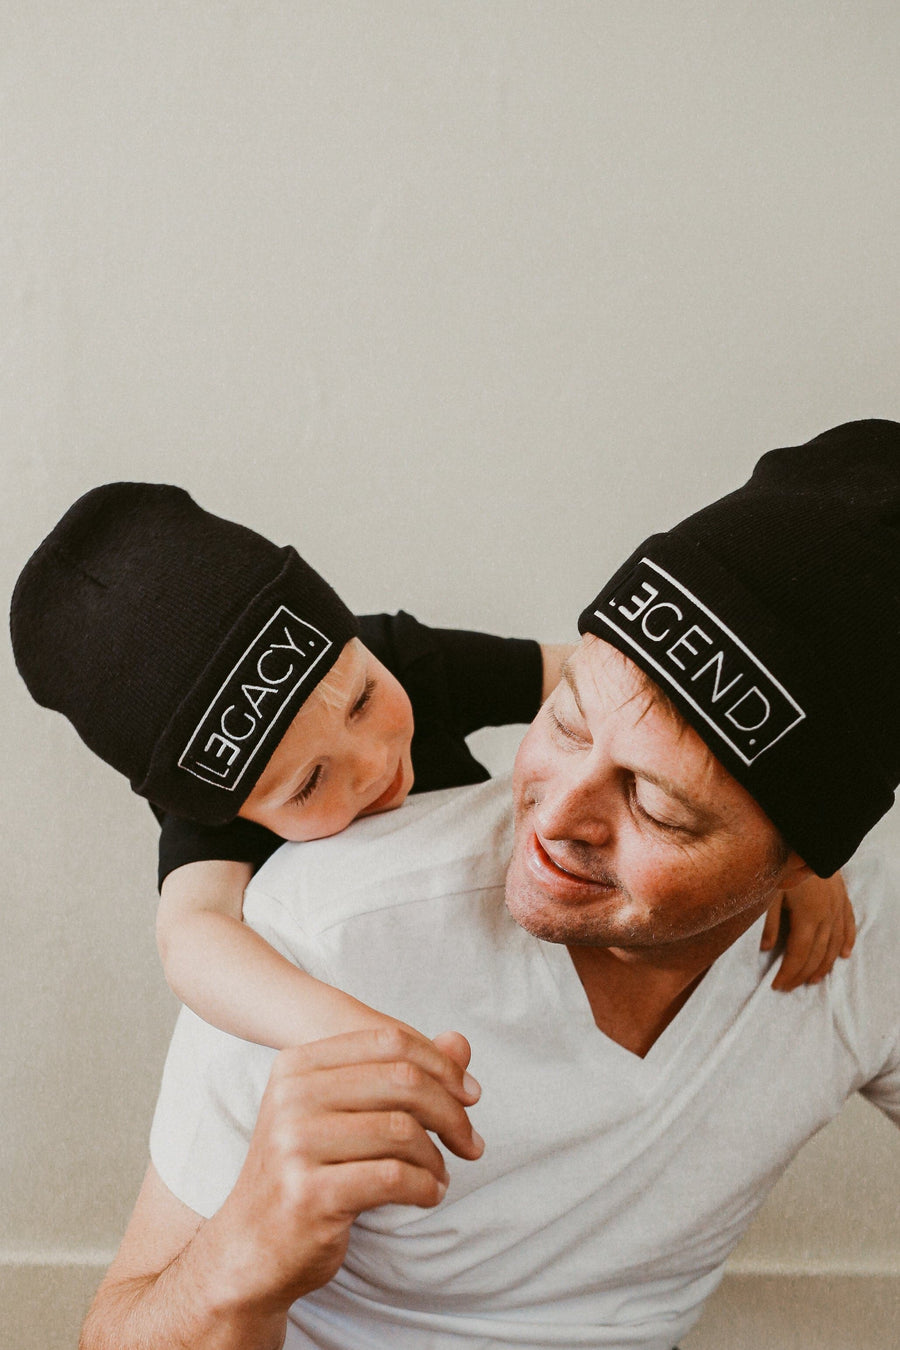 Coordinating Beanies Legend & Legacy, Embroidered Matching Family Beanies, Dad and Kid Beanie